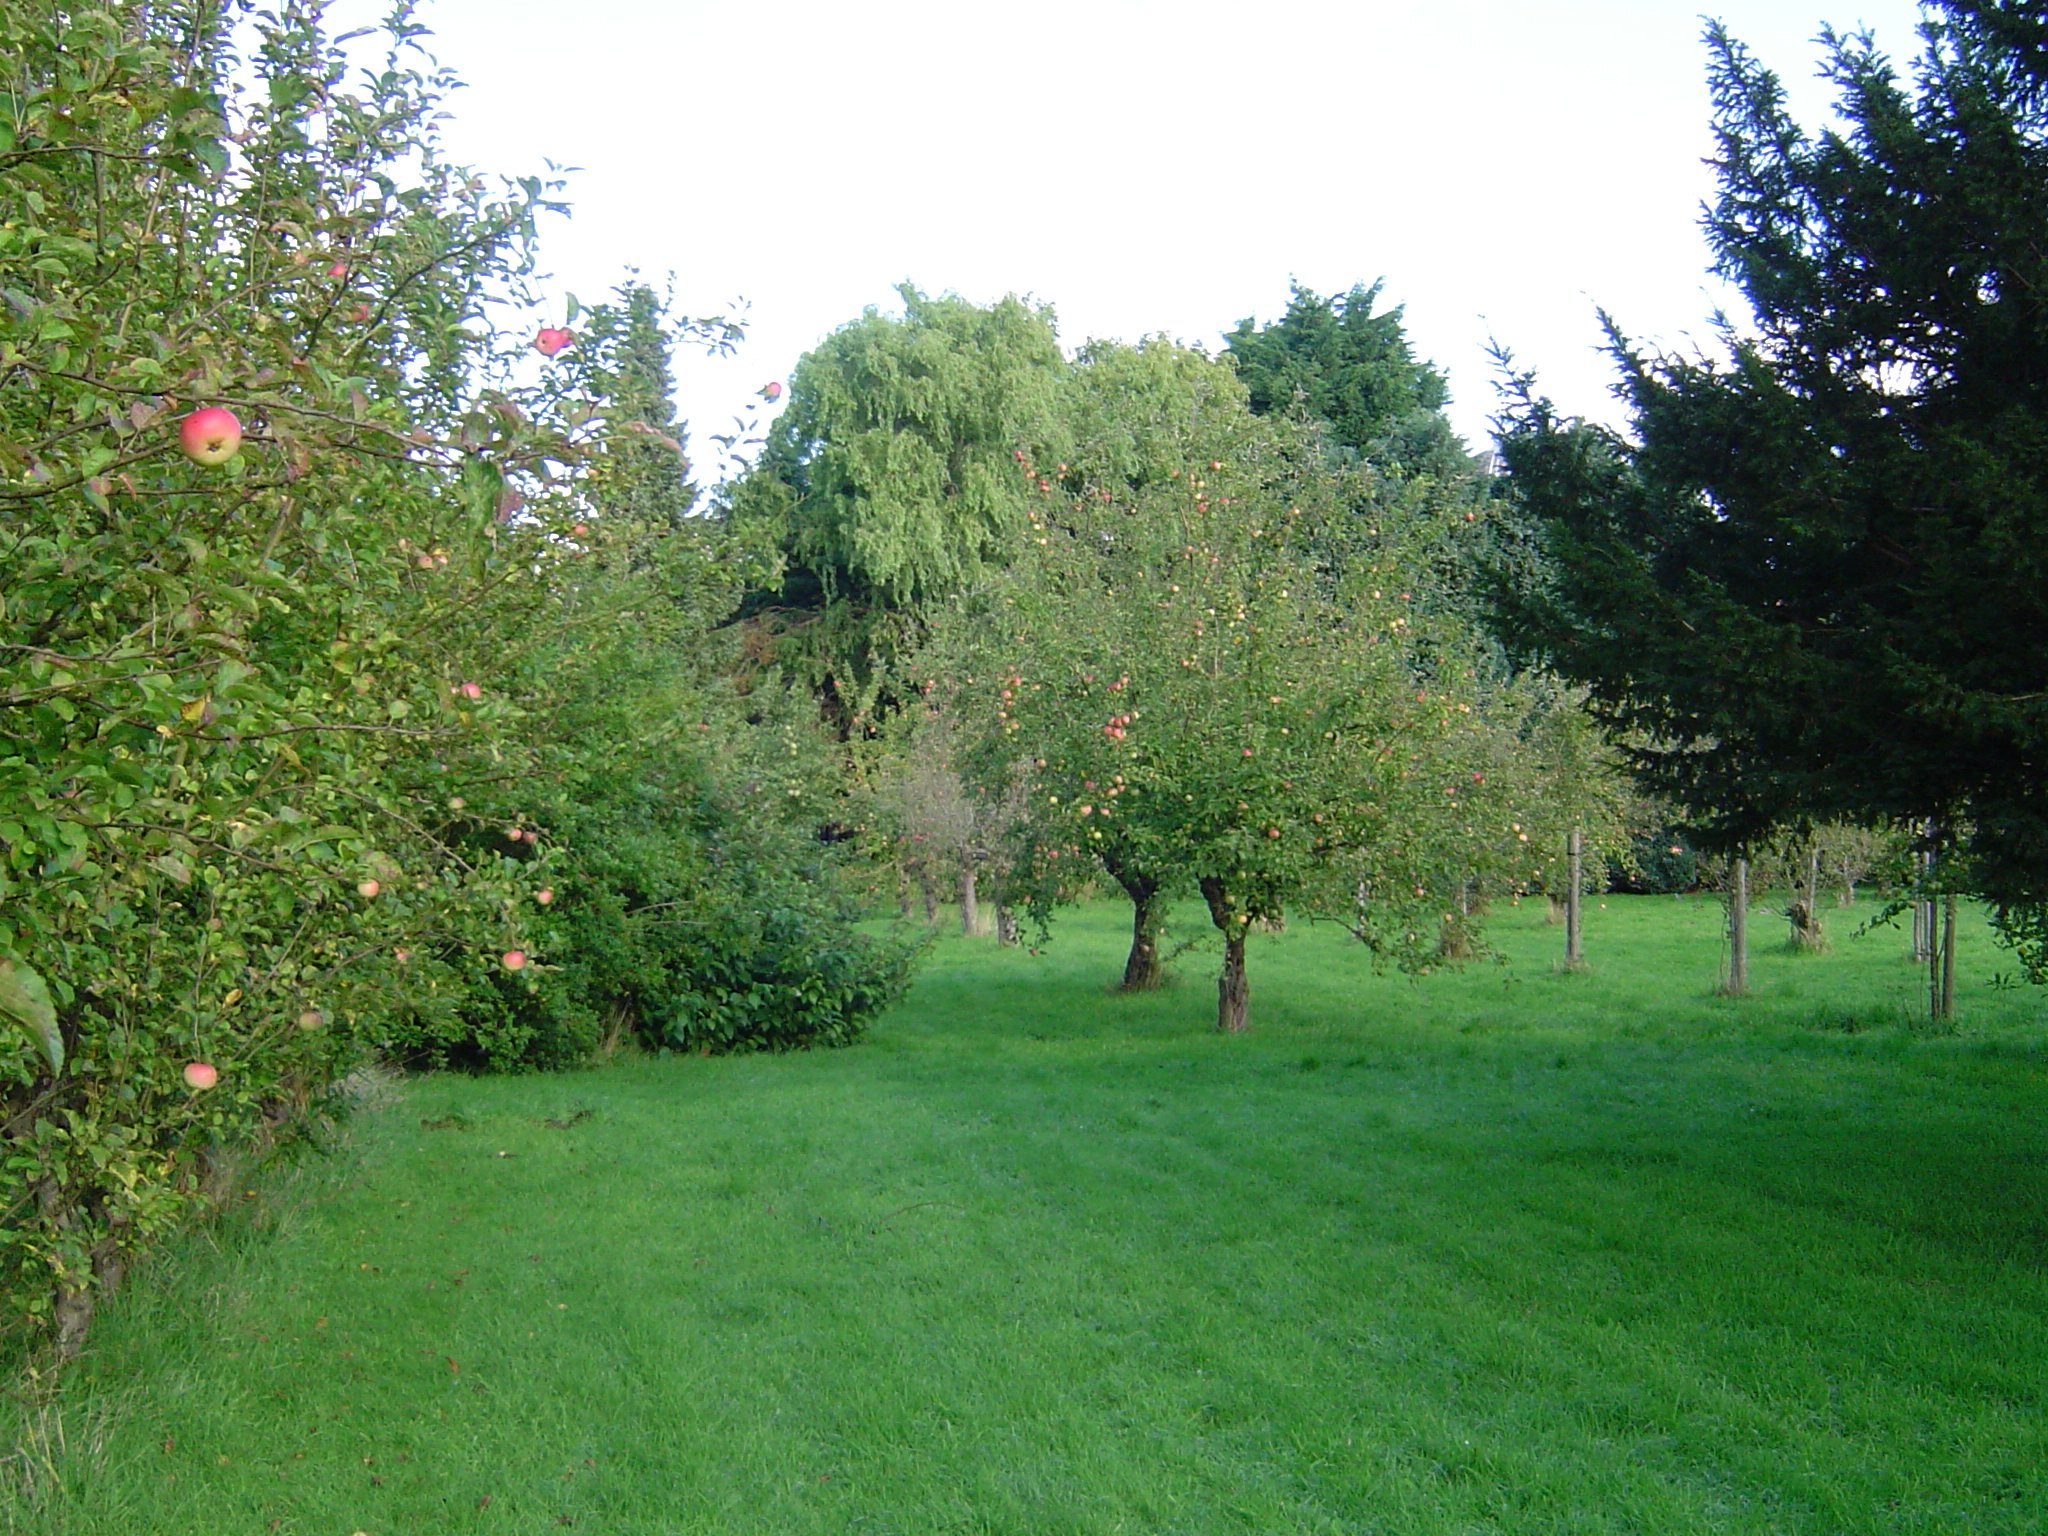 The Orchard, 2015